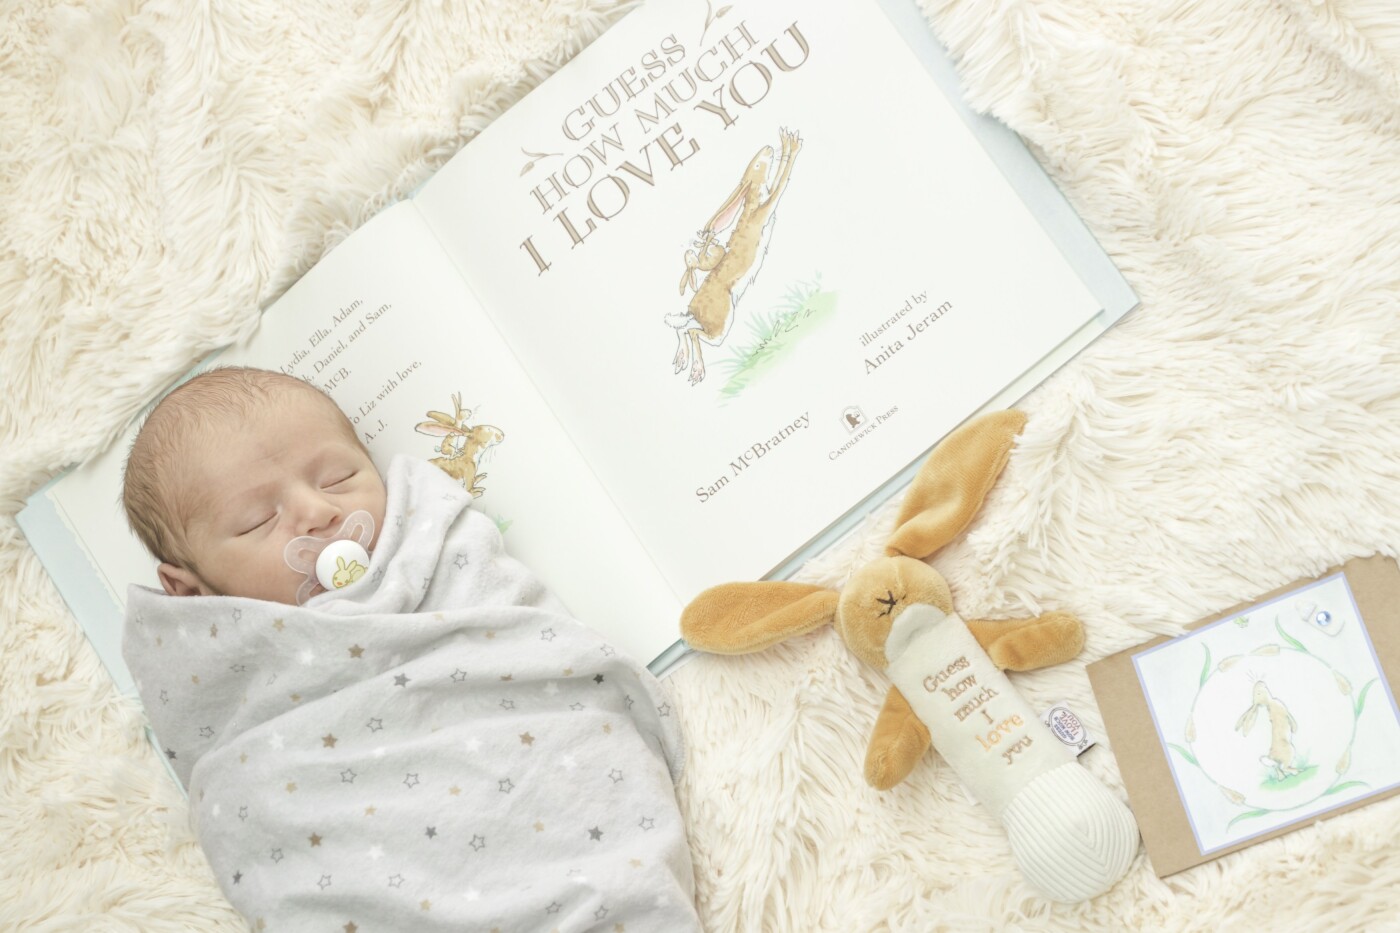 Baby Brandon's parents expressed to us how much this book meant to them when they first booked their maternity session.  So it was only fitting to ensure that we got at least one photo with this book.  